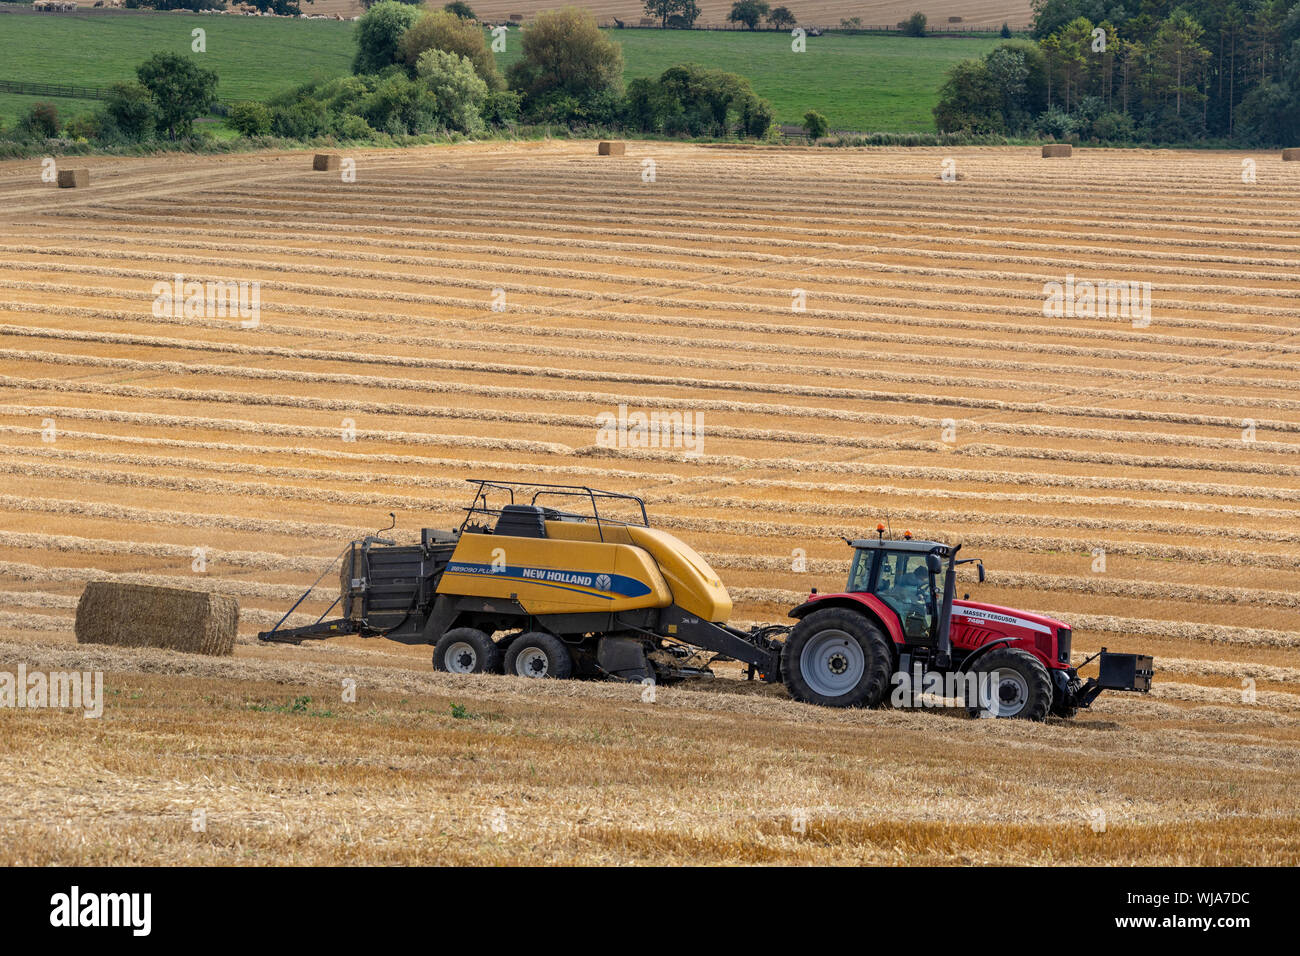 Hay Baler working in a field in the North Yorkshire countryside - United Kingdom Stock Photo